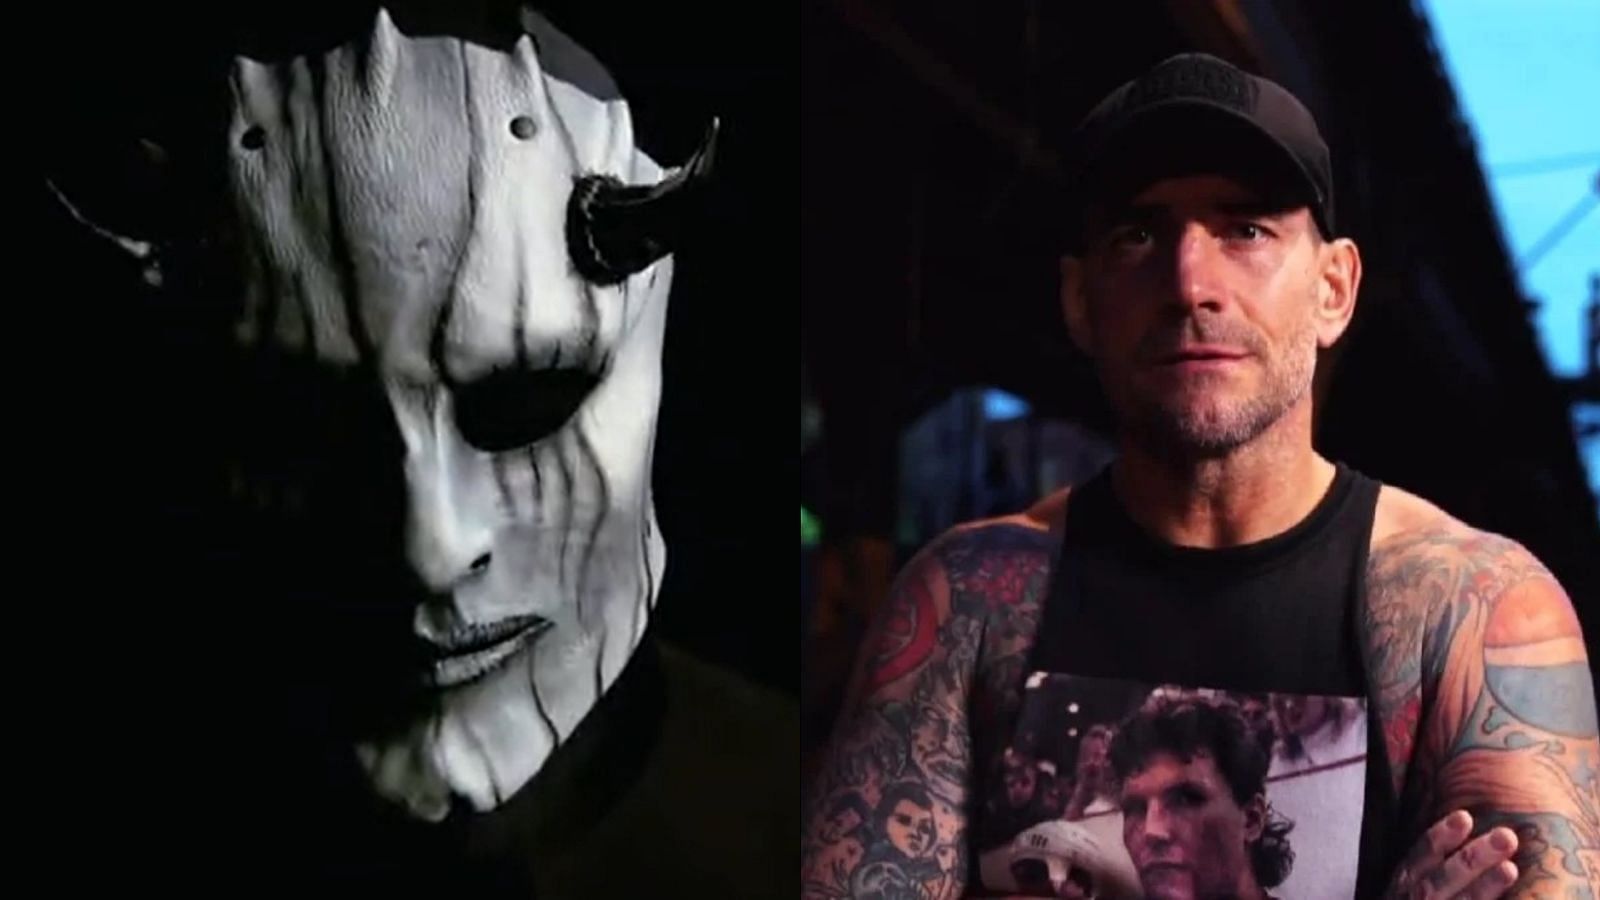 CM Punk has been speculated to be the man in the devil mask